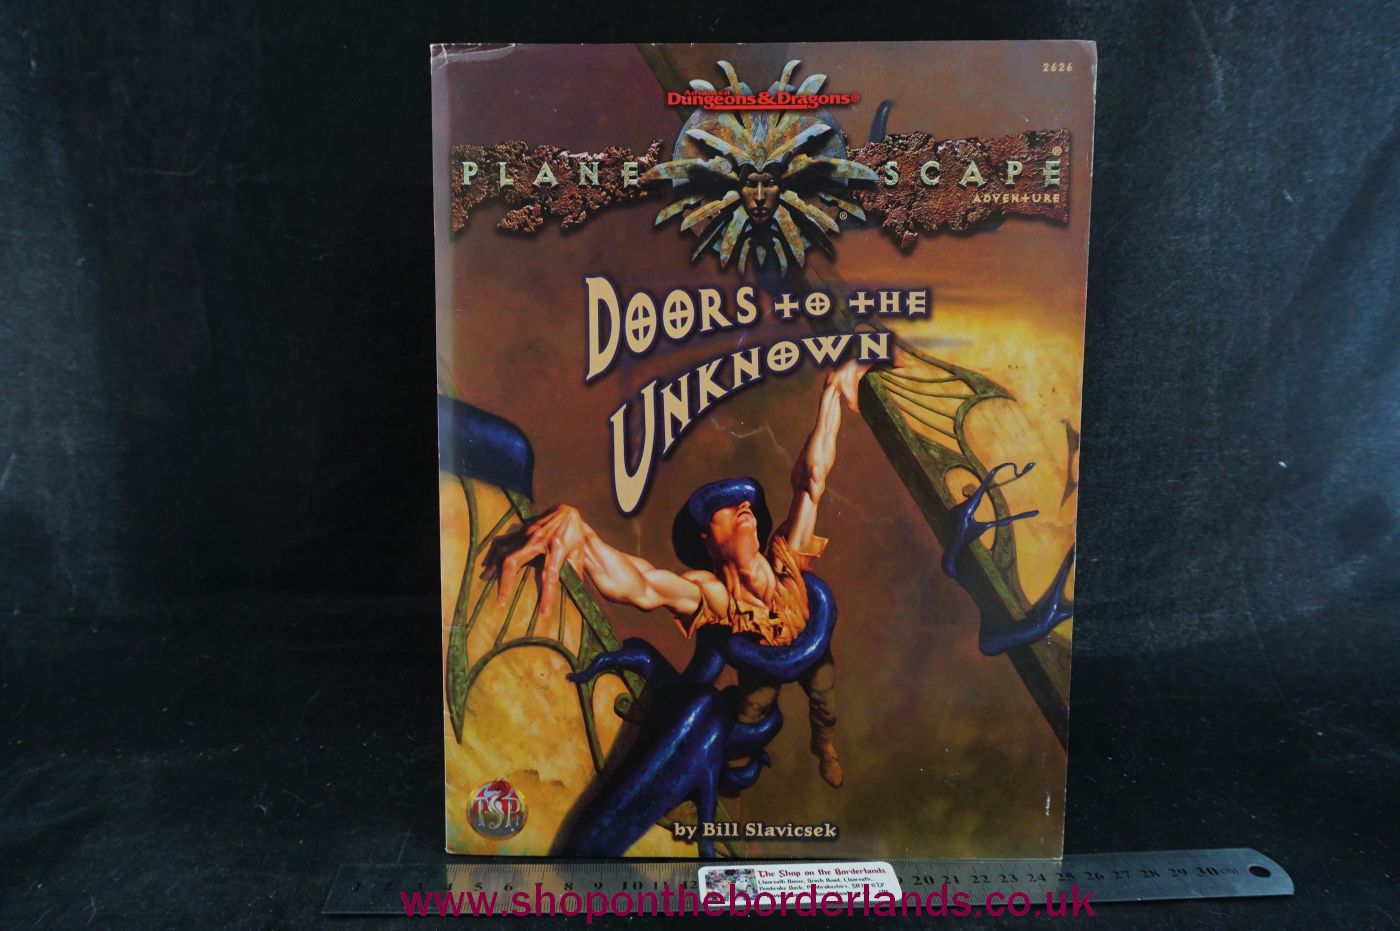 Doors to the Unknown, softback Planescape adventure for AD&D 2nd/2.5th  edition